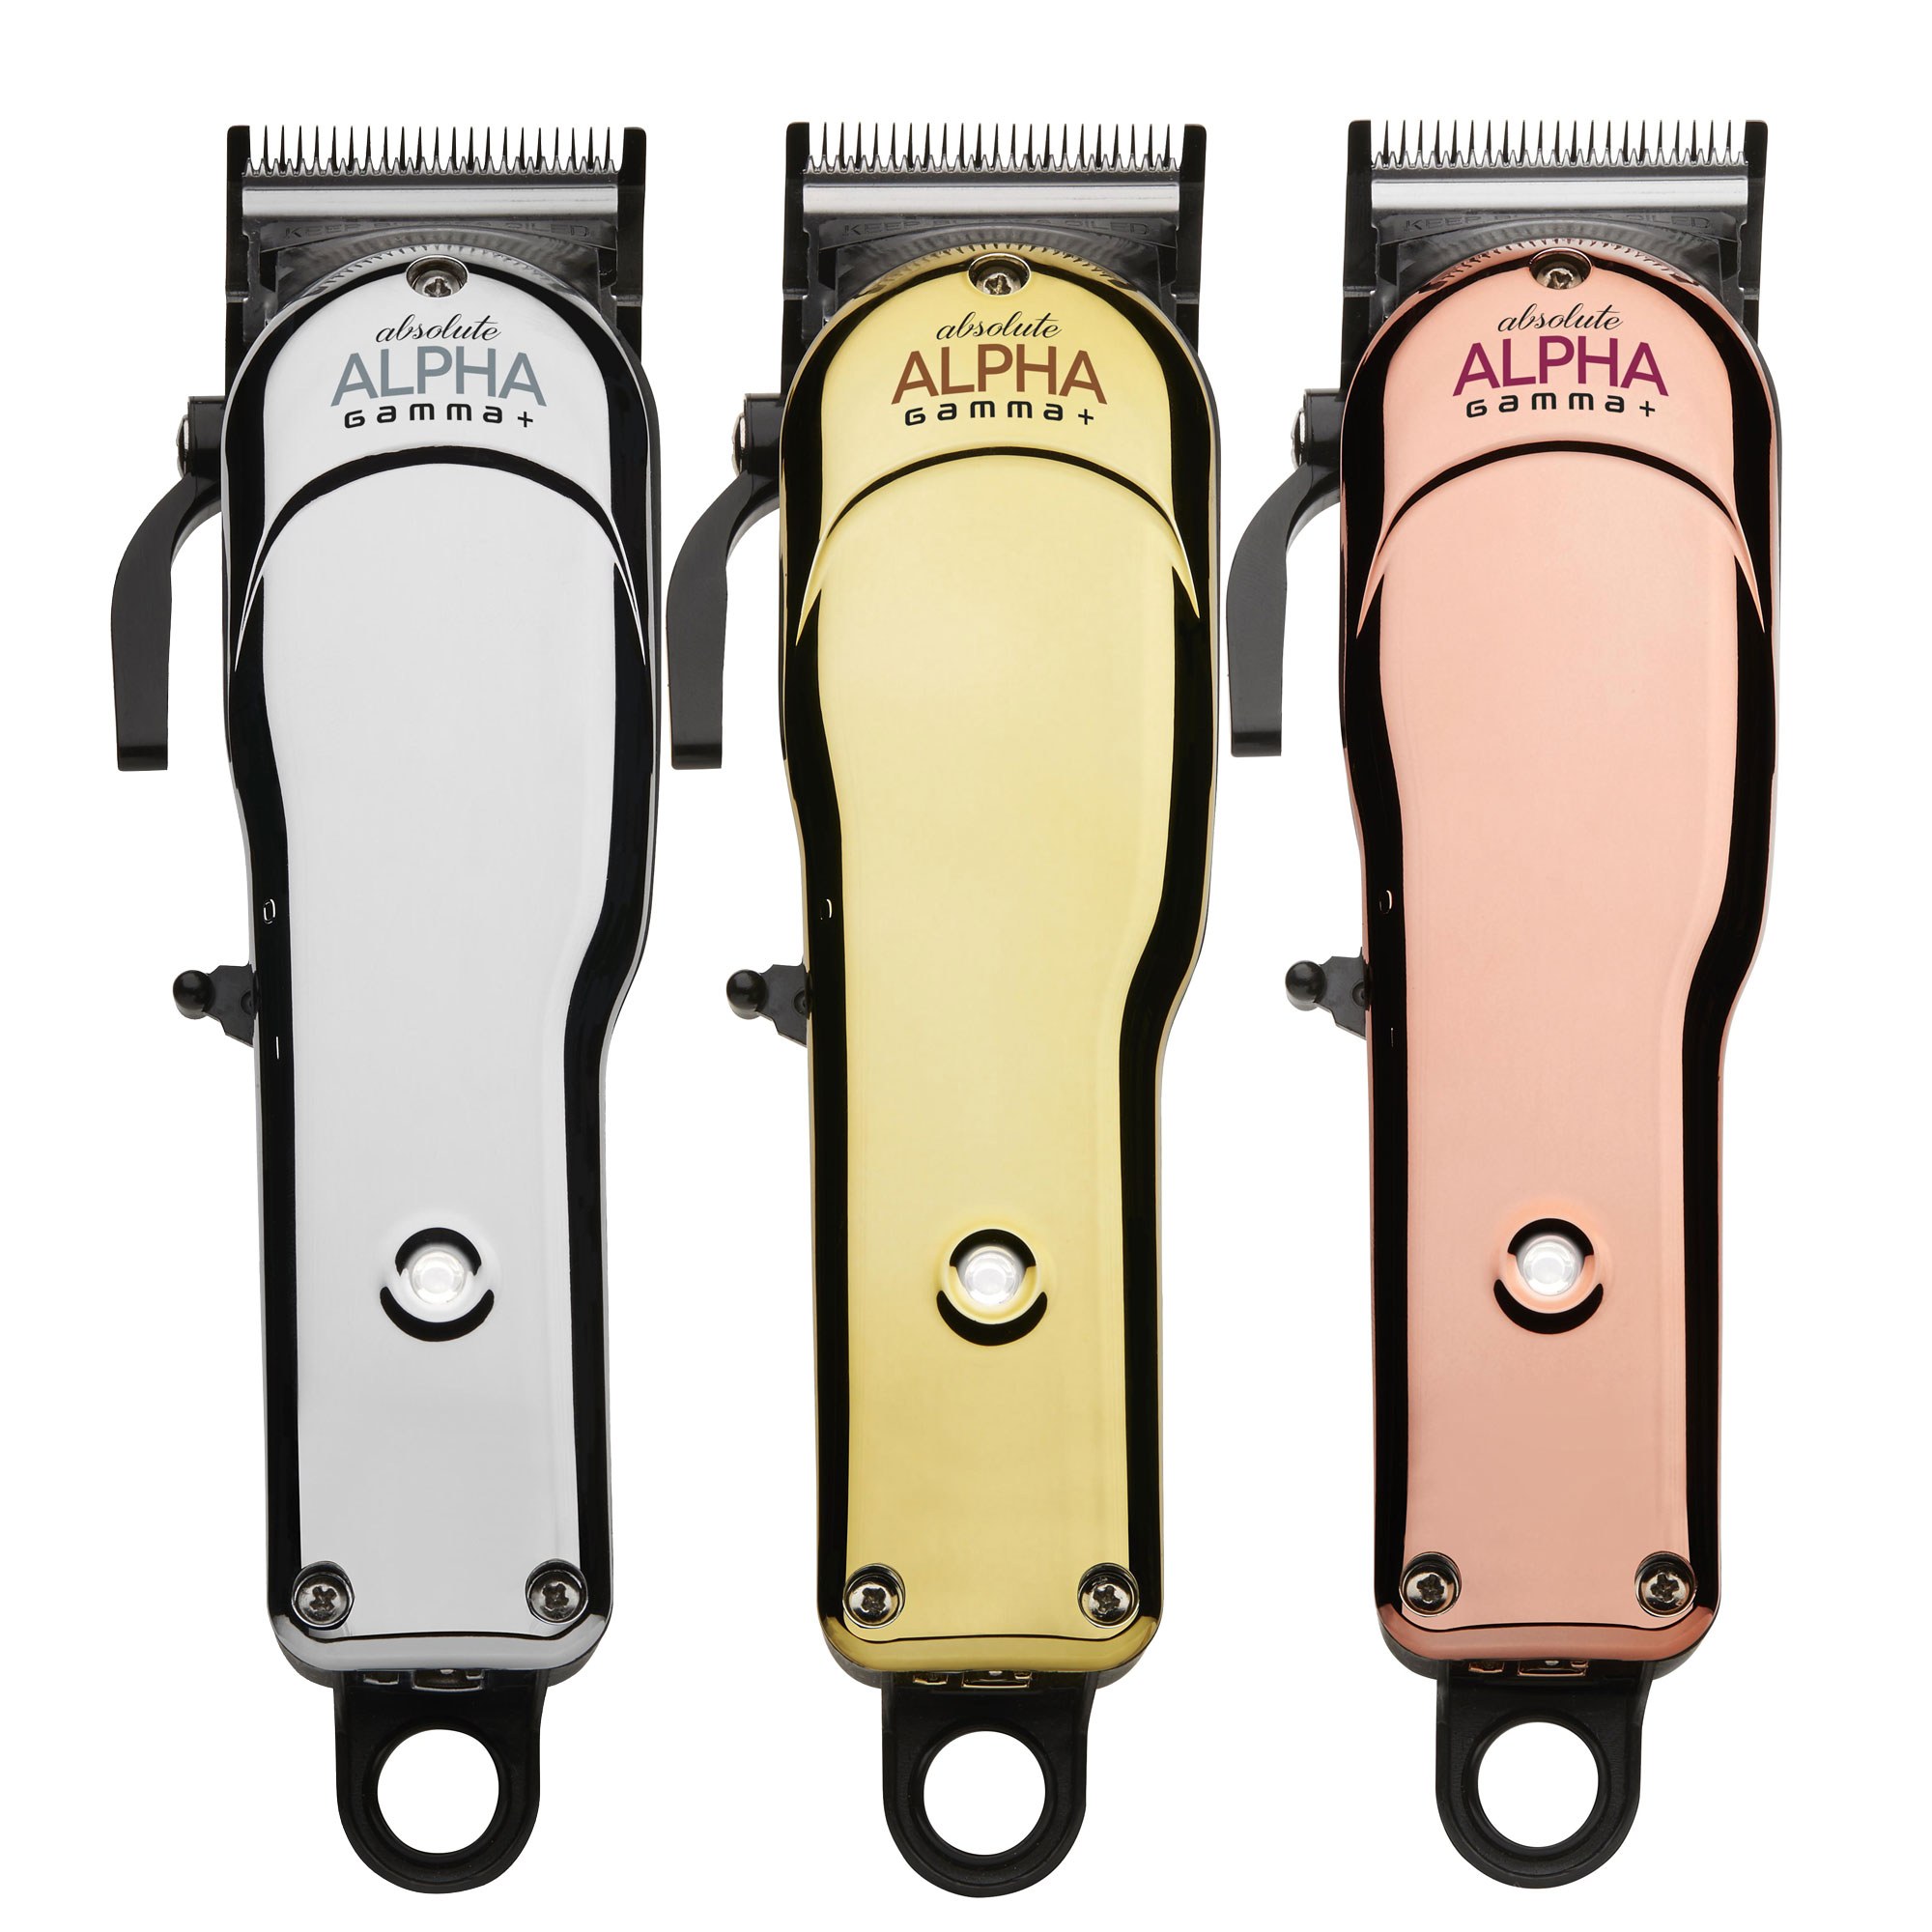 Stylecraft Absolute Alpha Clipper with Chrome, Gold, Rose Gold Metallic Body Kits Gamma+